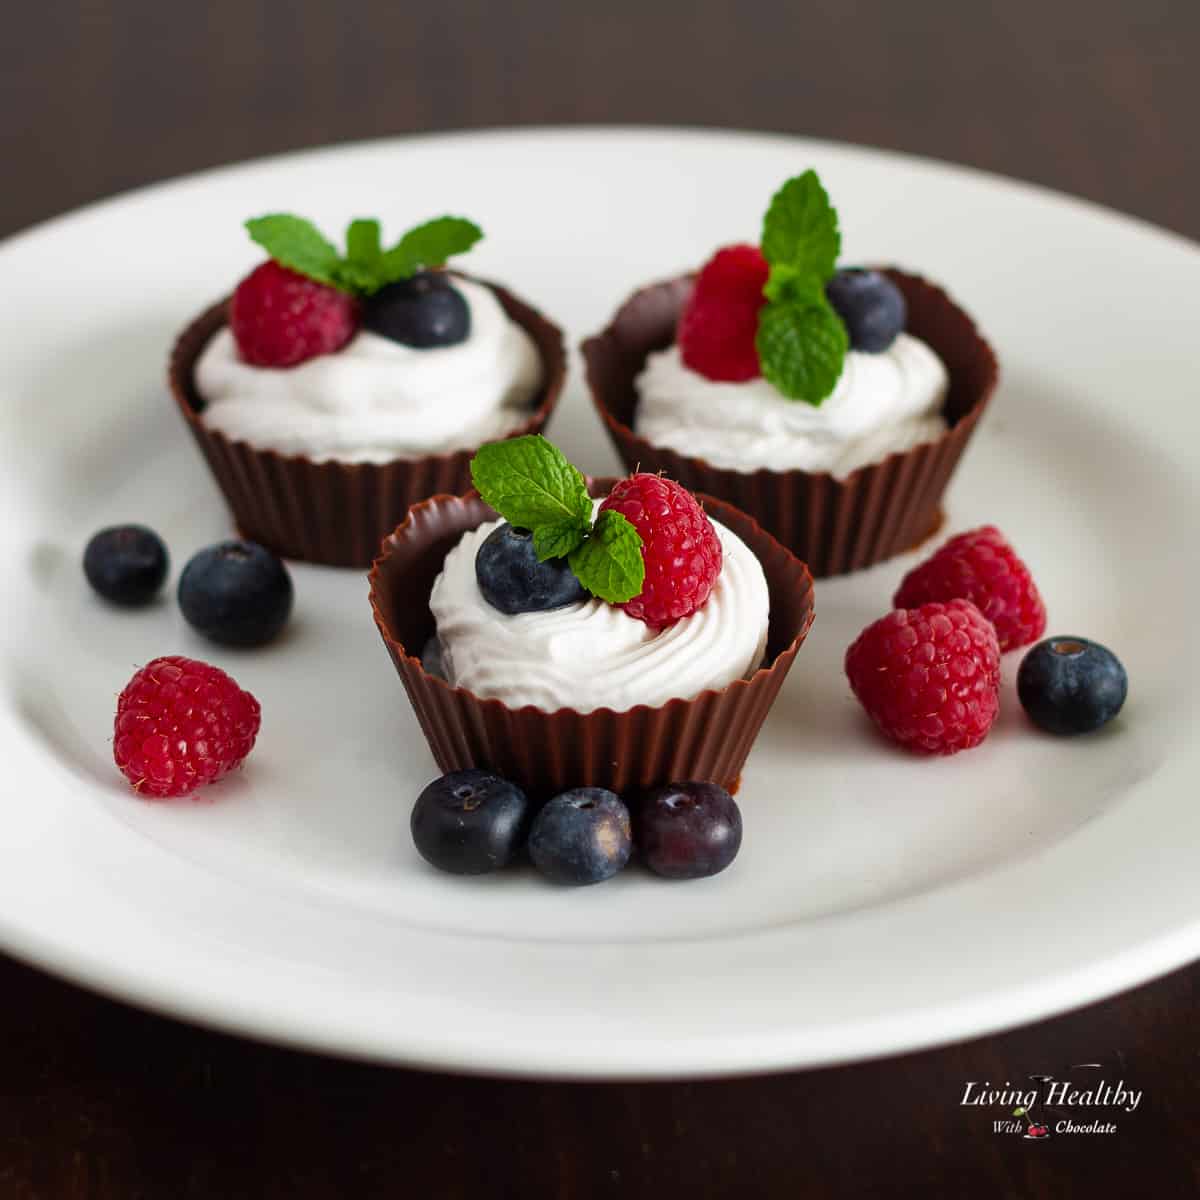 Chocolate cups filled with coconut cream and fresh berries.